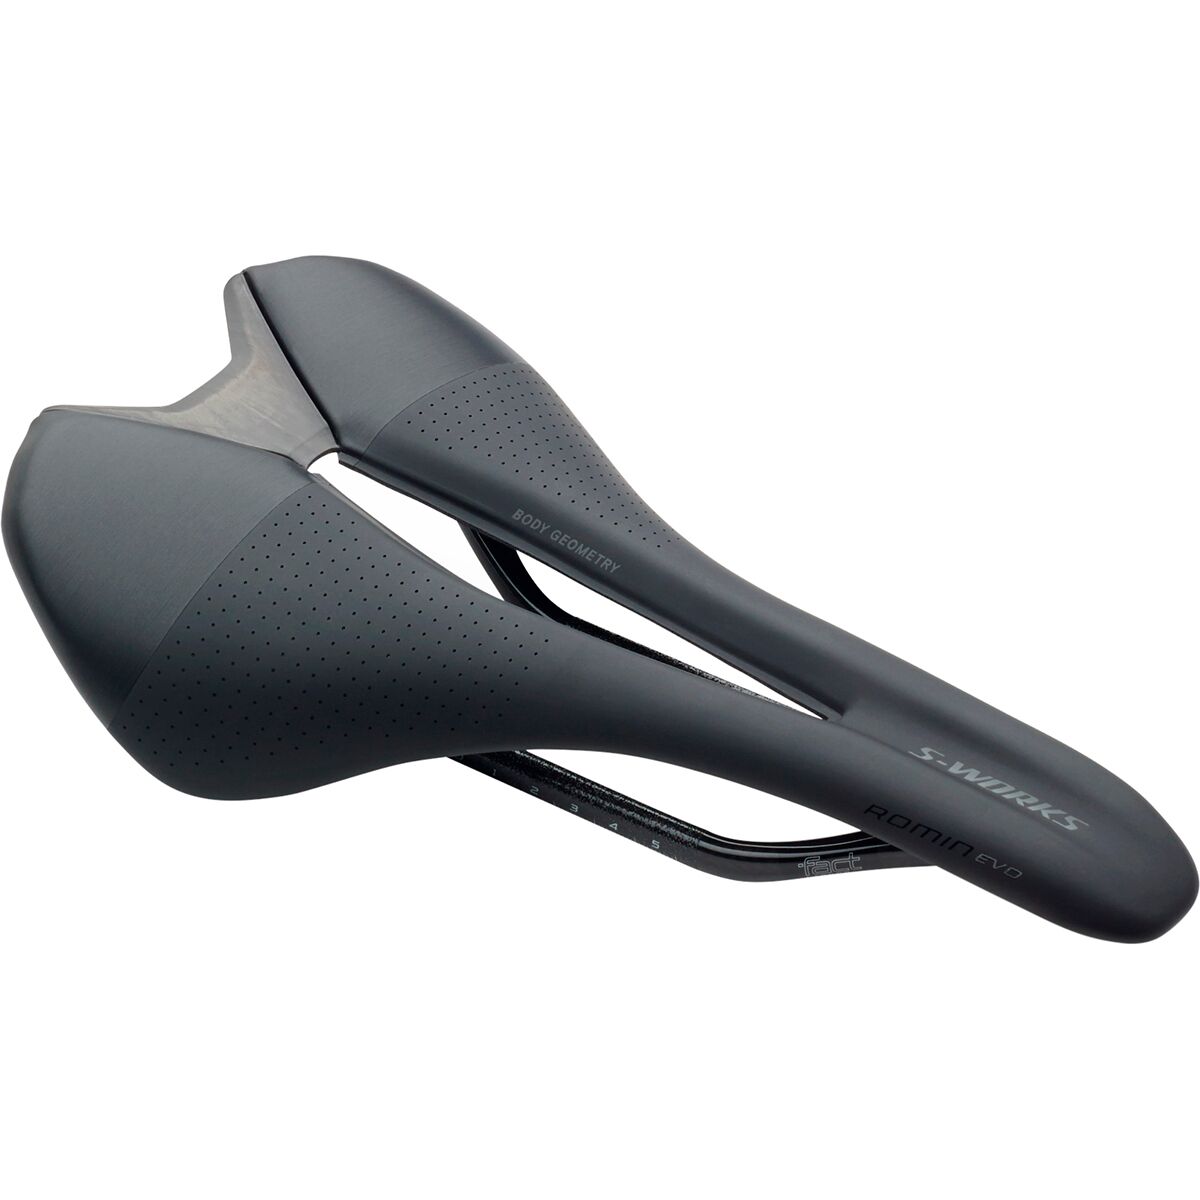 Specialized S-Works Romin EVO Saddle - Components